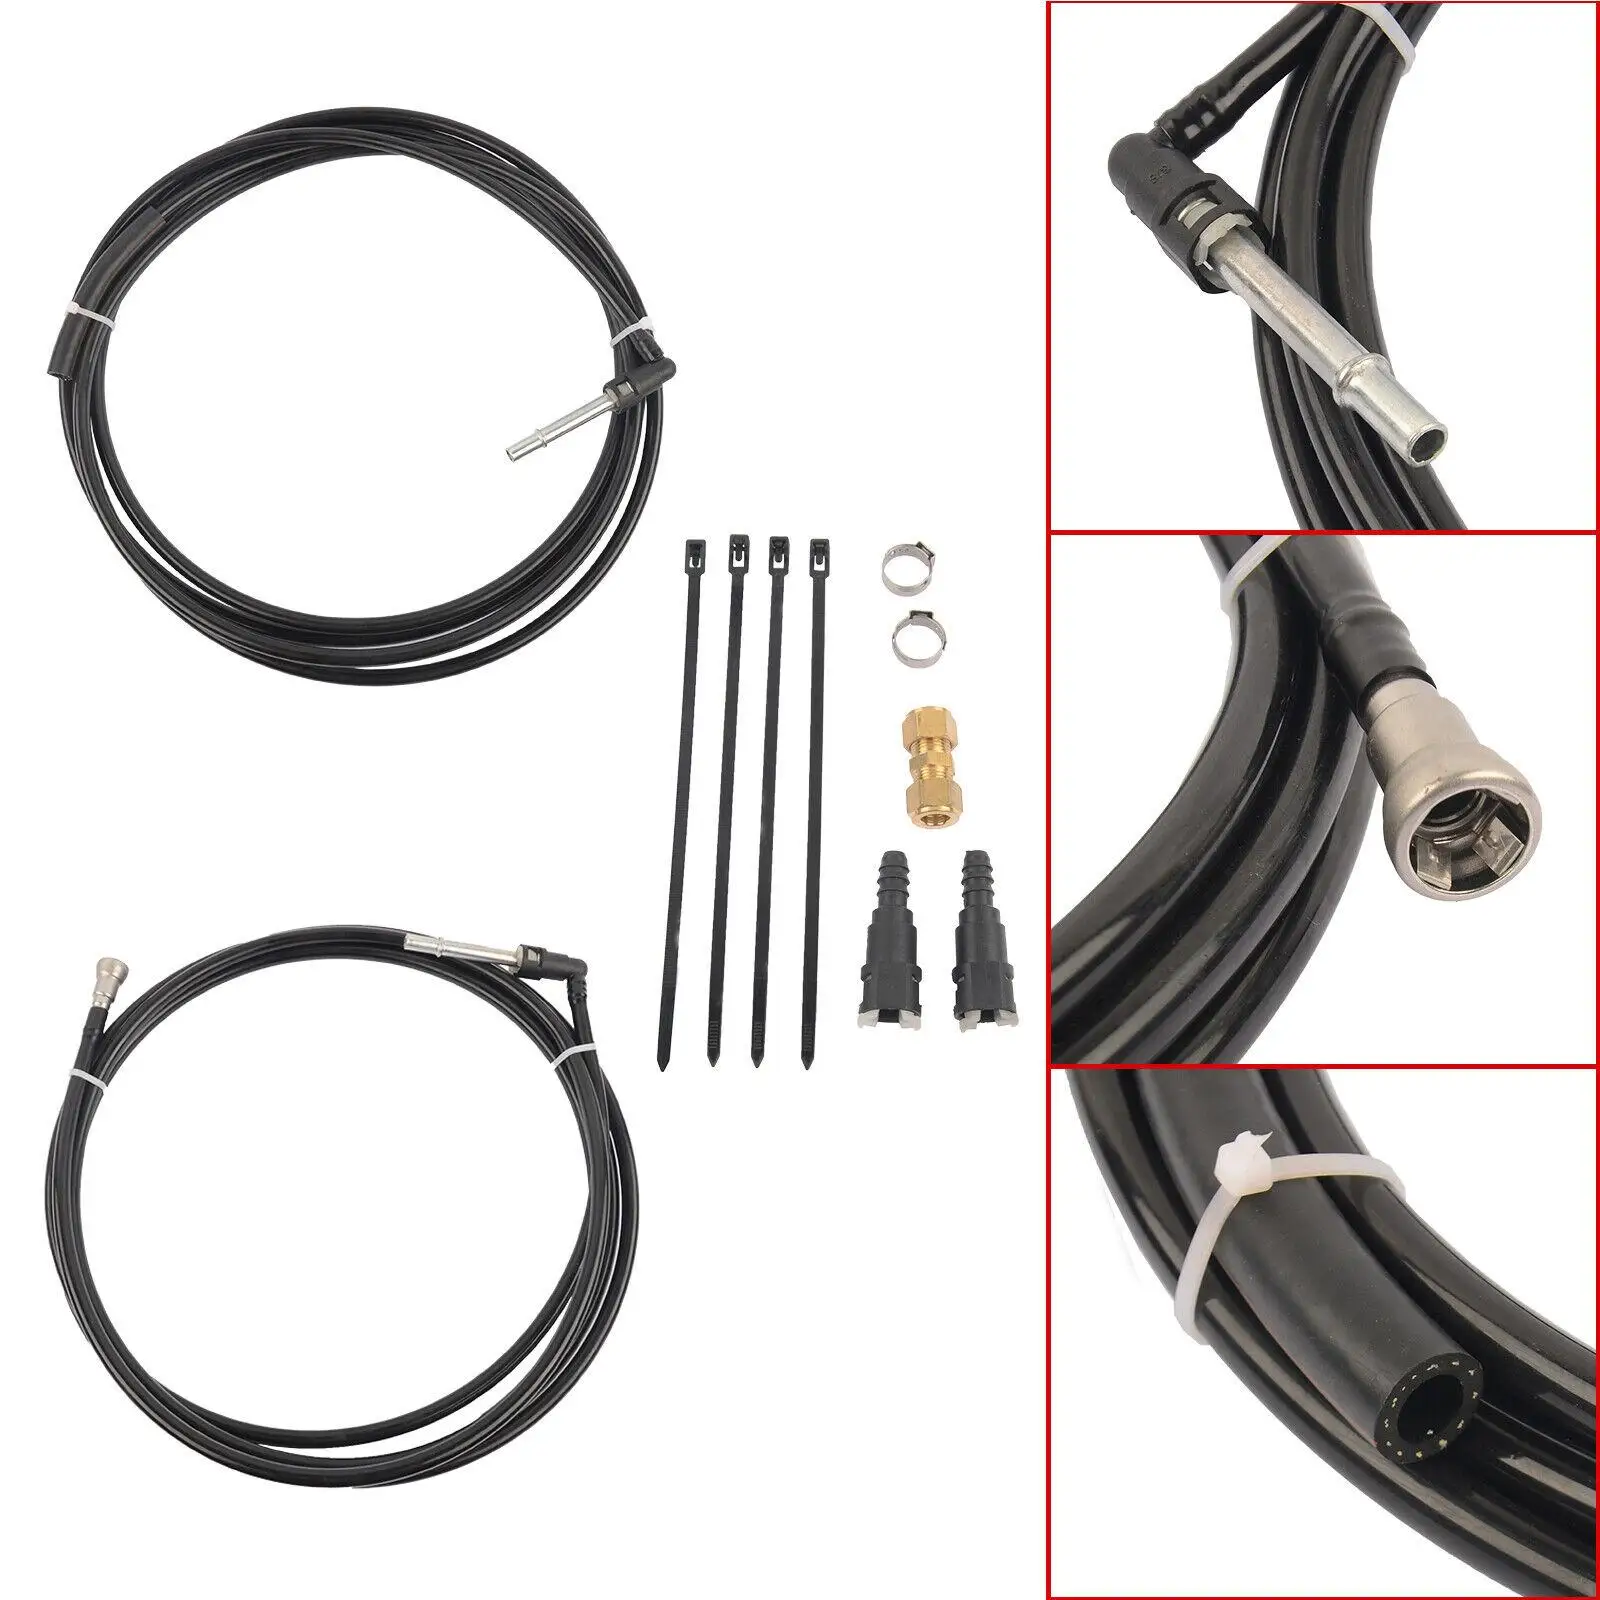 Fuel Lines Kit Flfg0340 Durable for Chevy Silverado GMC Sierra 1500 2500 3500 Vehicle Spare Parts Stable Performance